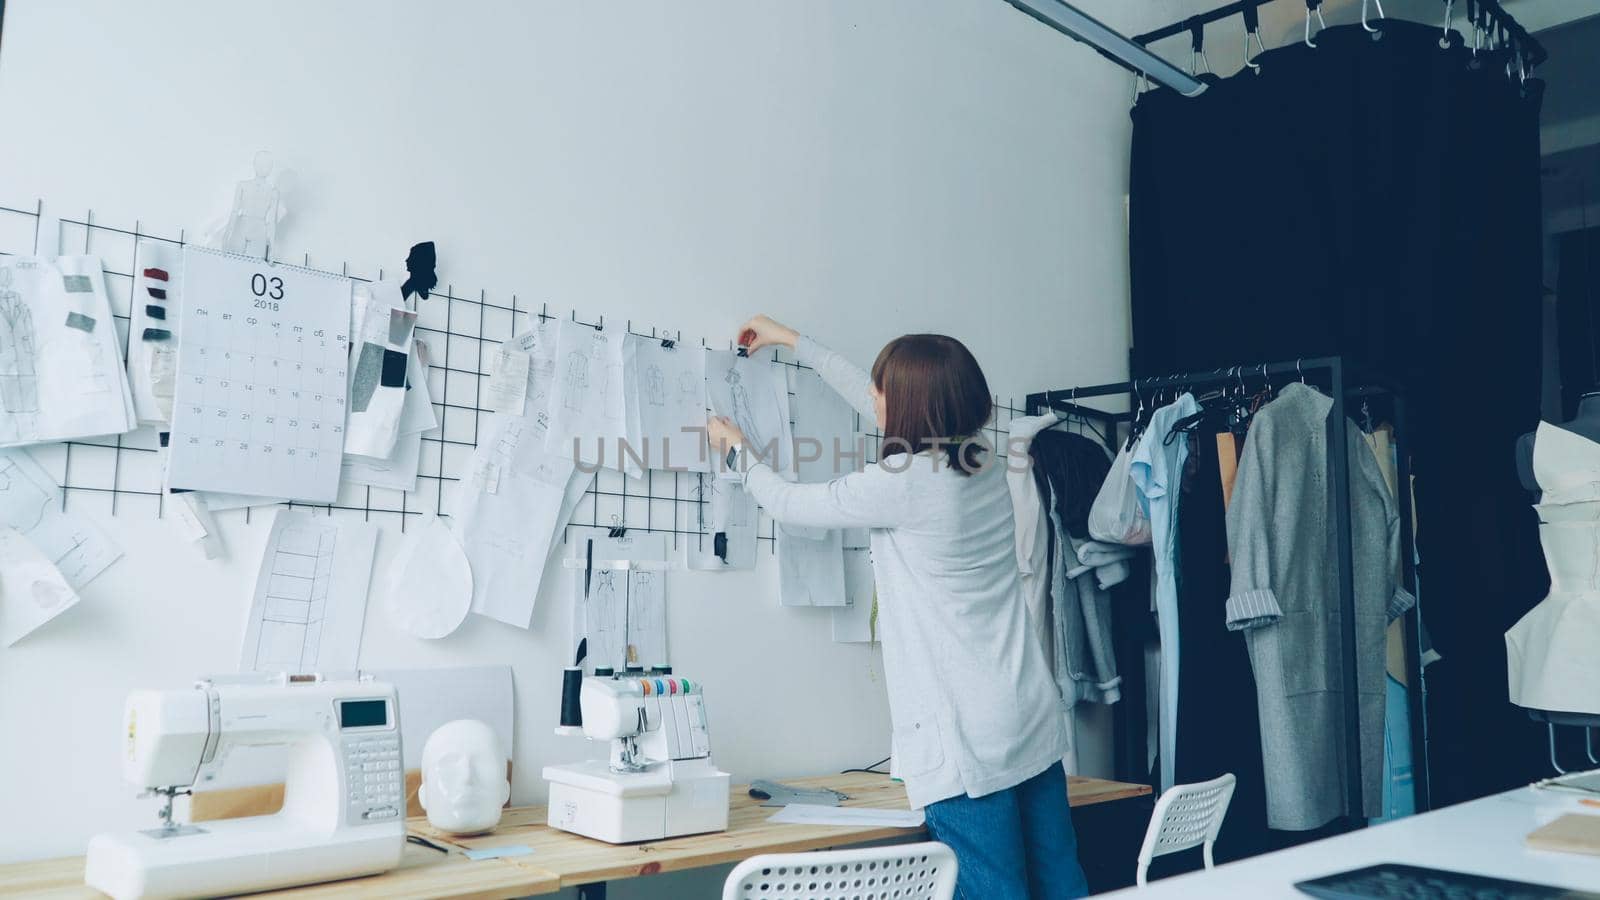 Female clothing designer is taking sketches from studio table and putting them on wall with other drawings of women's garments. Creative thinking concept. by silverkblack